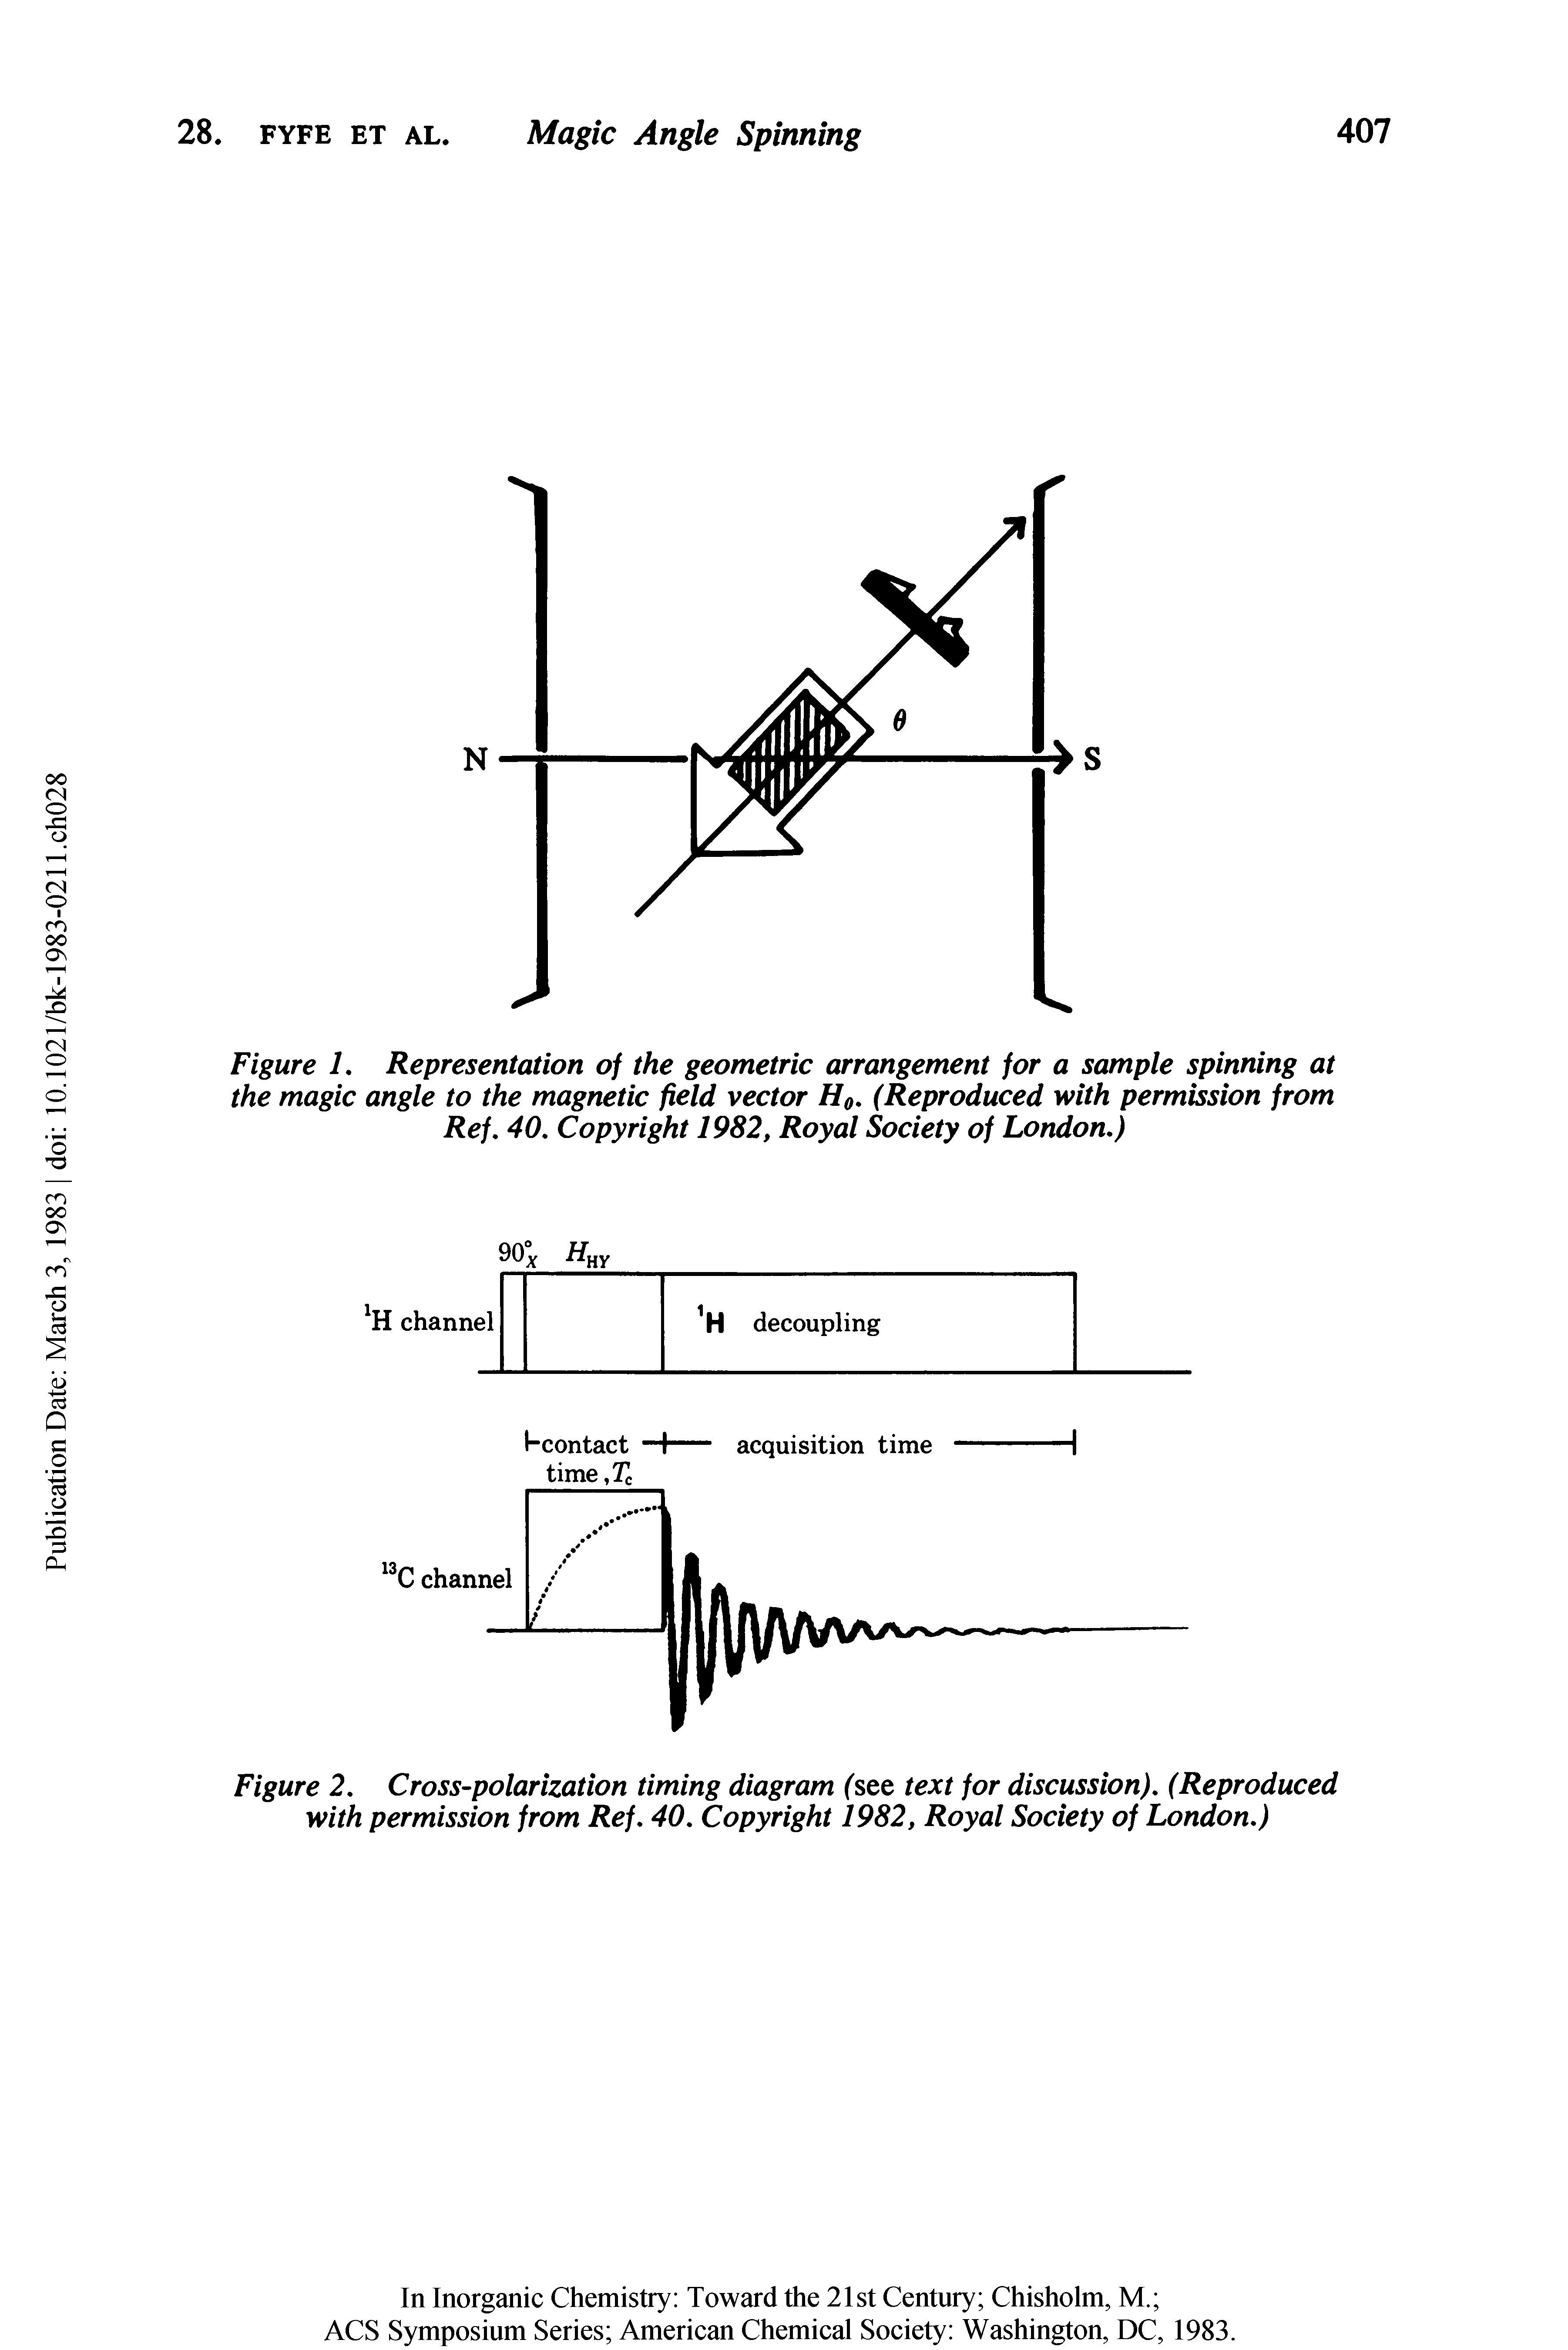 Figure 1, Representation of the geometric arrangement for a sample spinning at the magic angle to the magnetic field vector H0. (Reproduced with permission from Ref, 40, Copyright 1982, Royal Society of London,)...